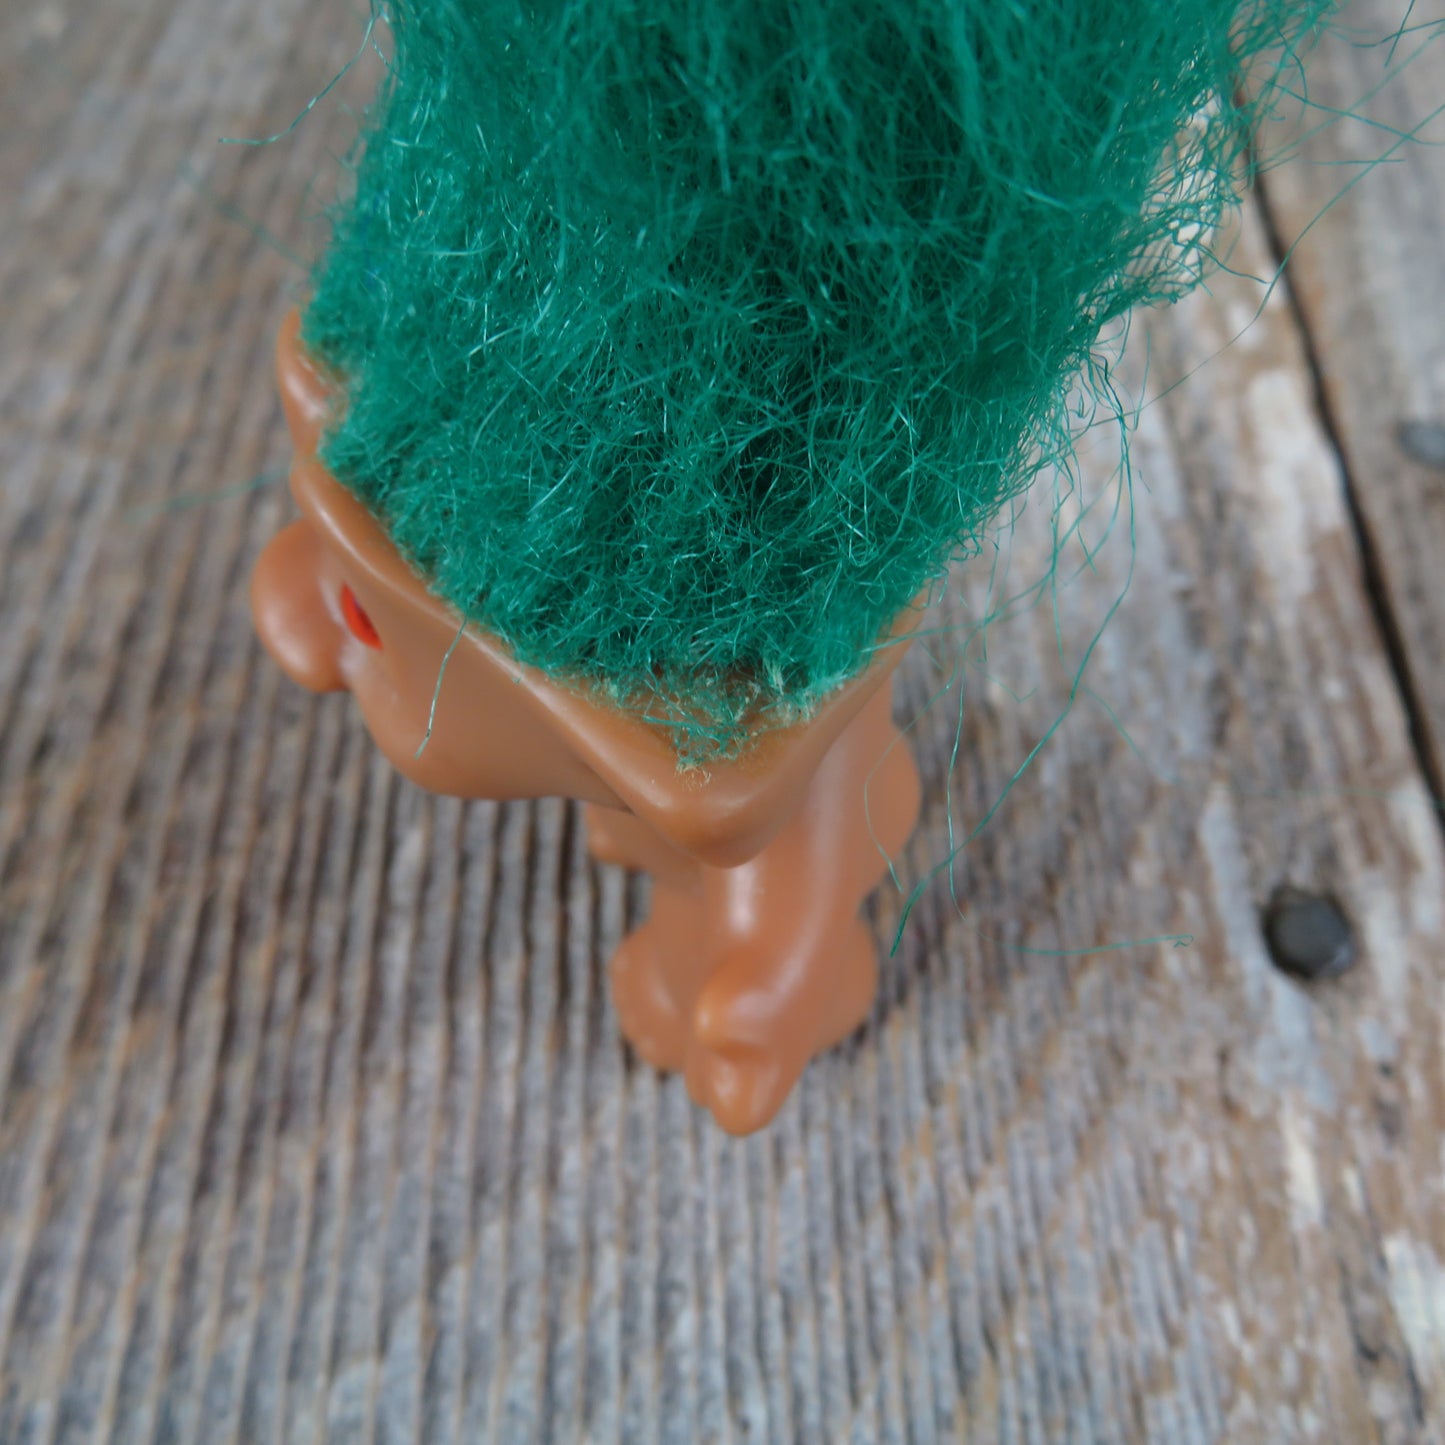 Vintage Troll Doll Orange Eyes and Star Belly Button Teal Green Hair Ace Novelty - At Grandma's Table